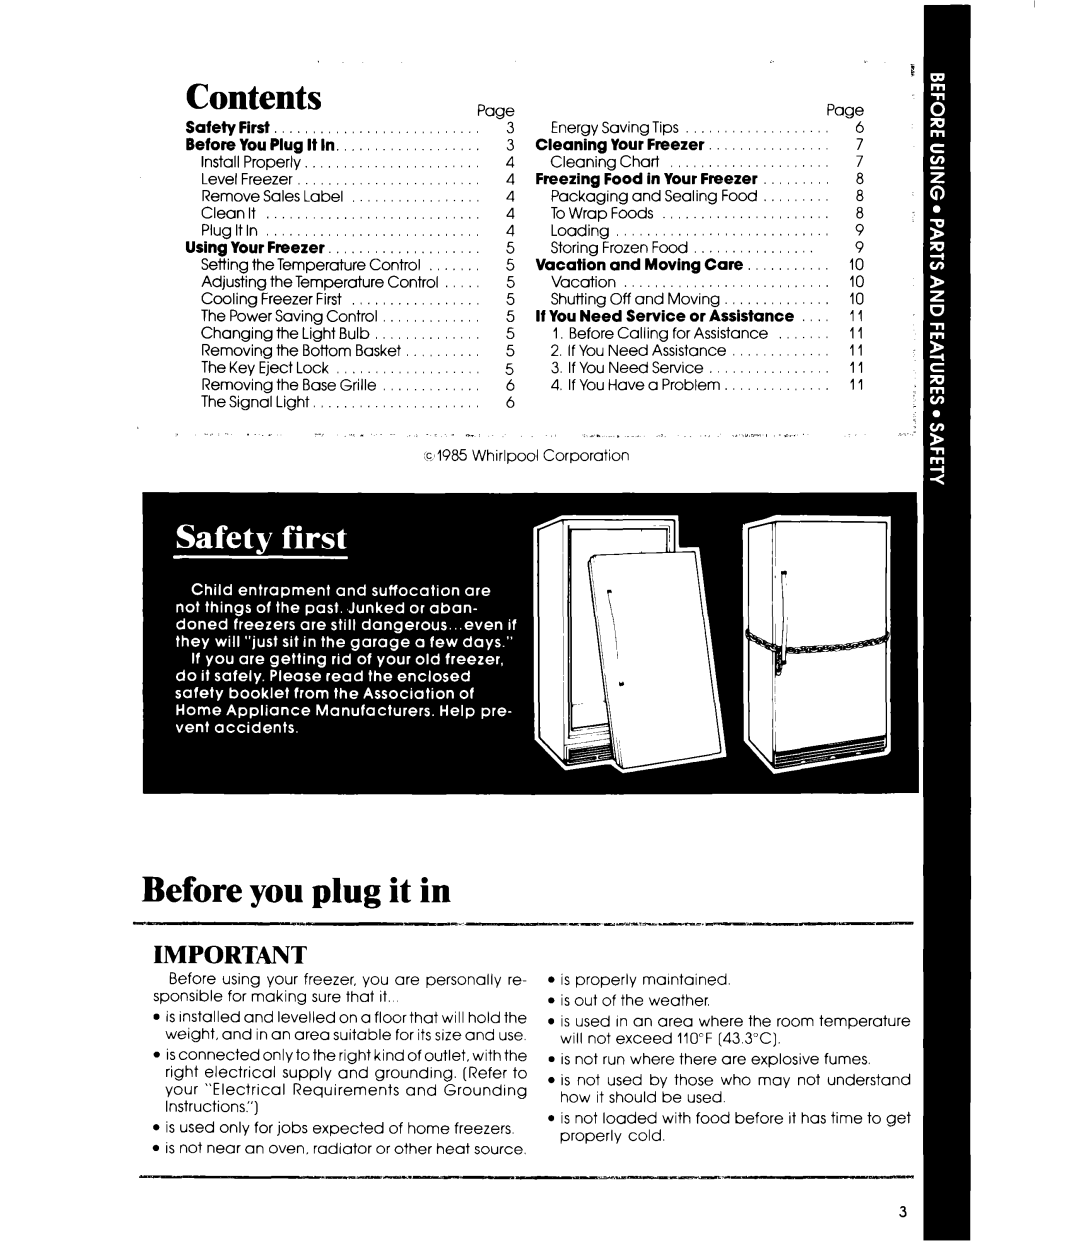 Whirlpool EVZOON manual Before you plug it in, Contents 